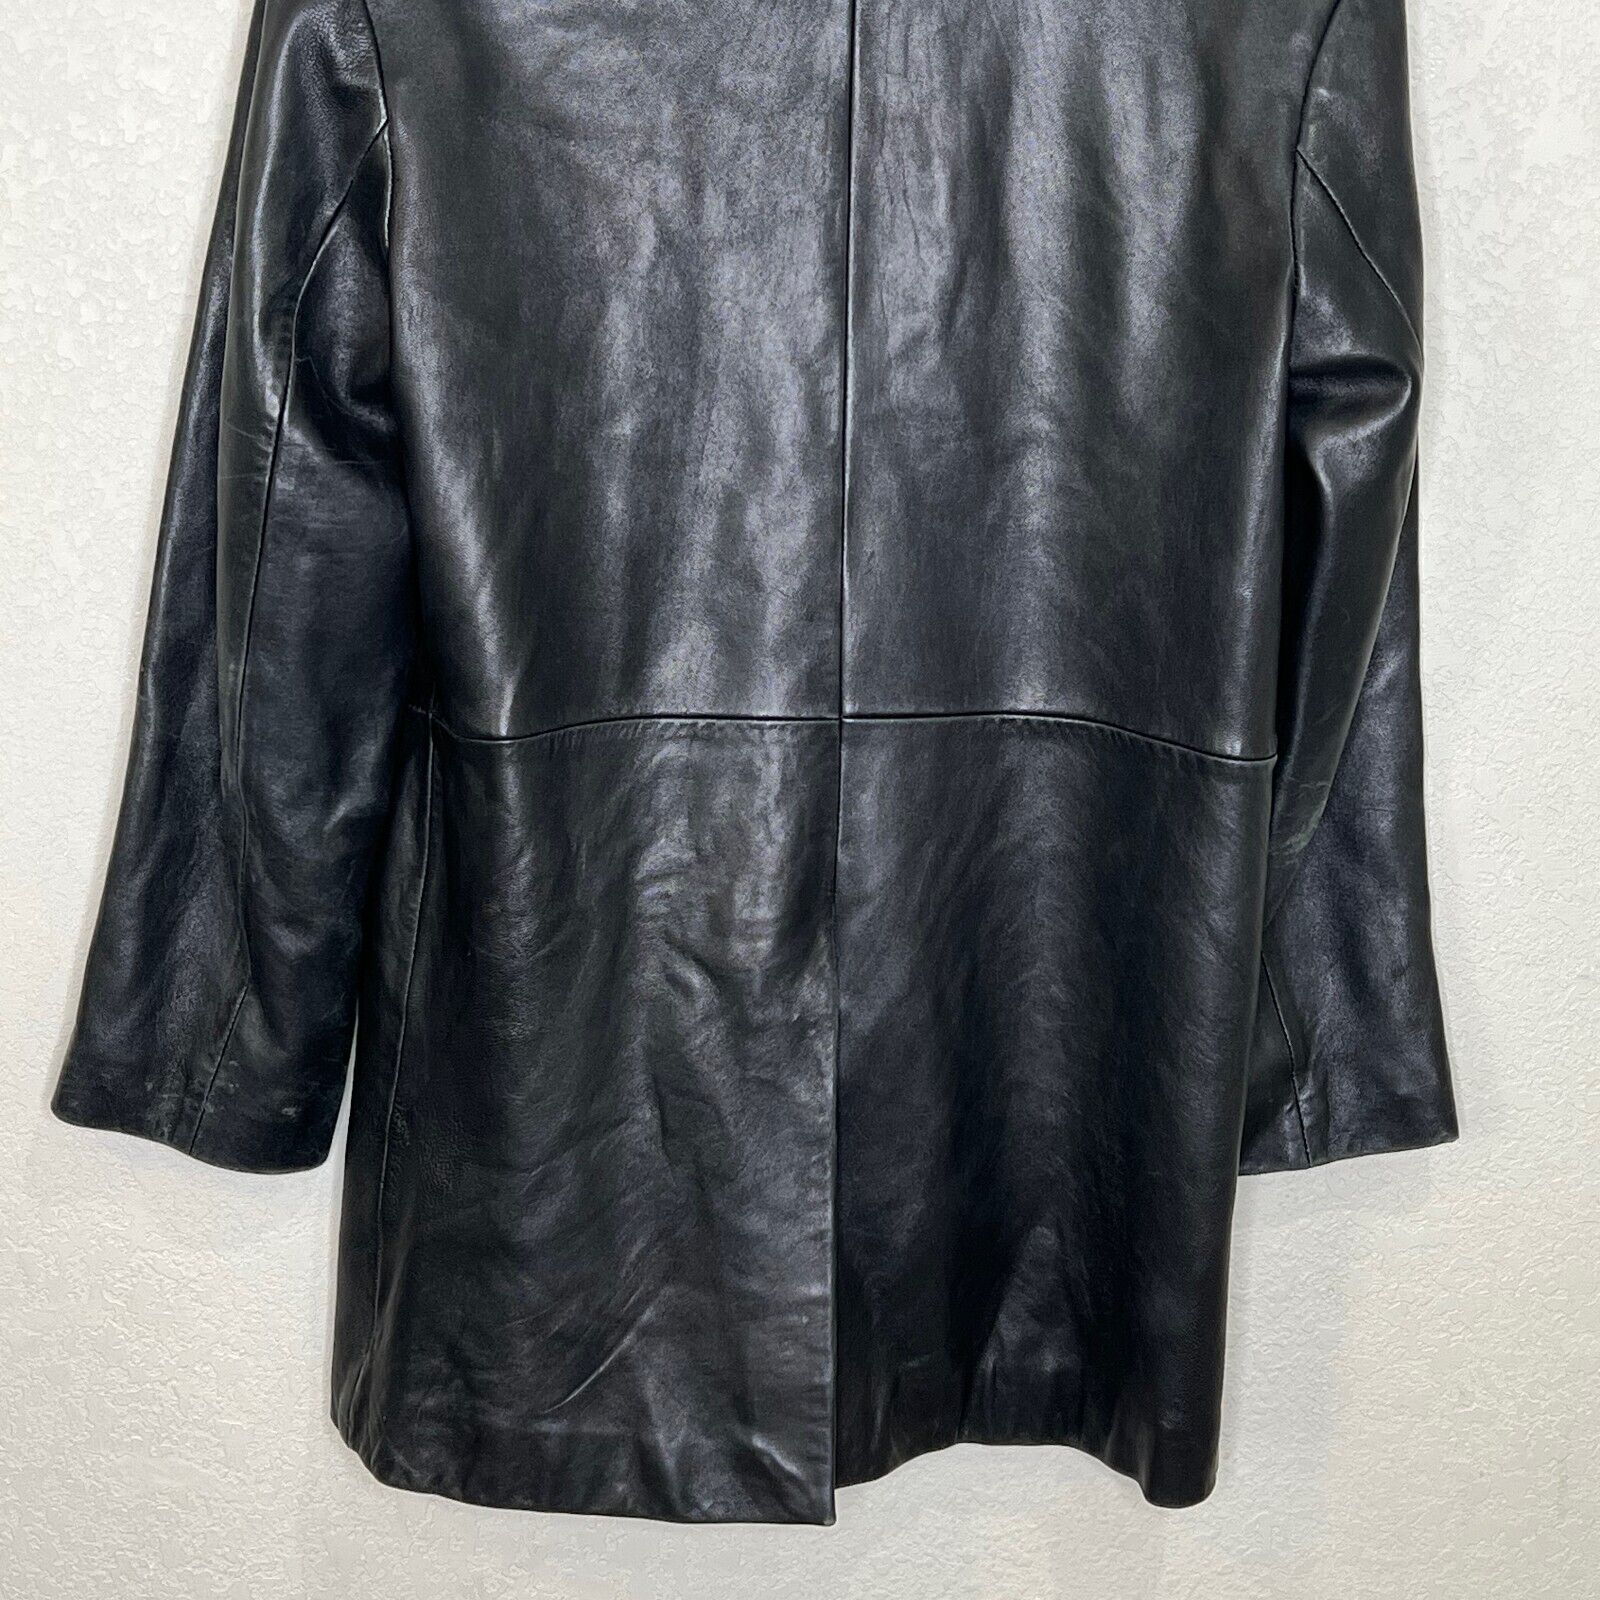 Marc New York ANDREW MARC Soft Black Glove-Leather Jacket Lined ~ Women's Small